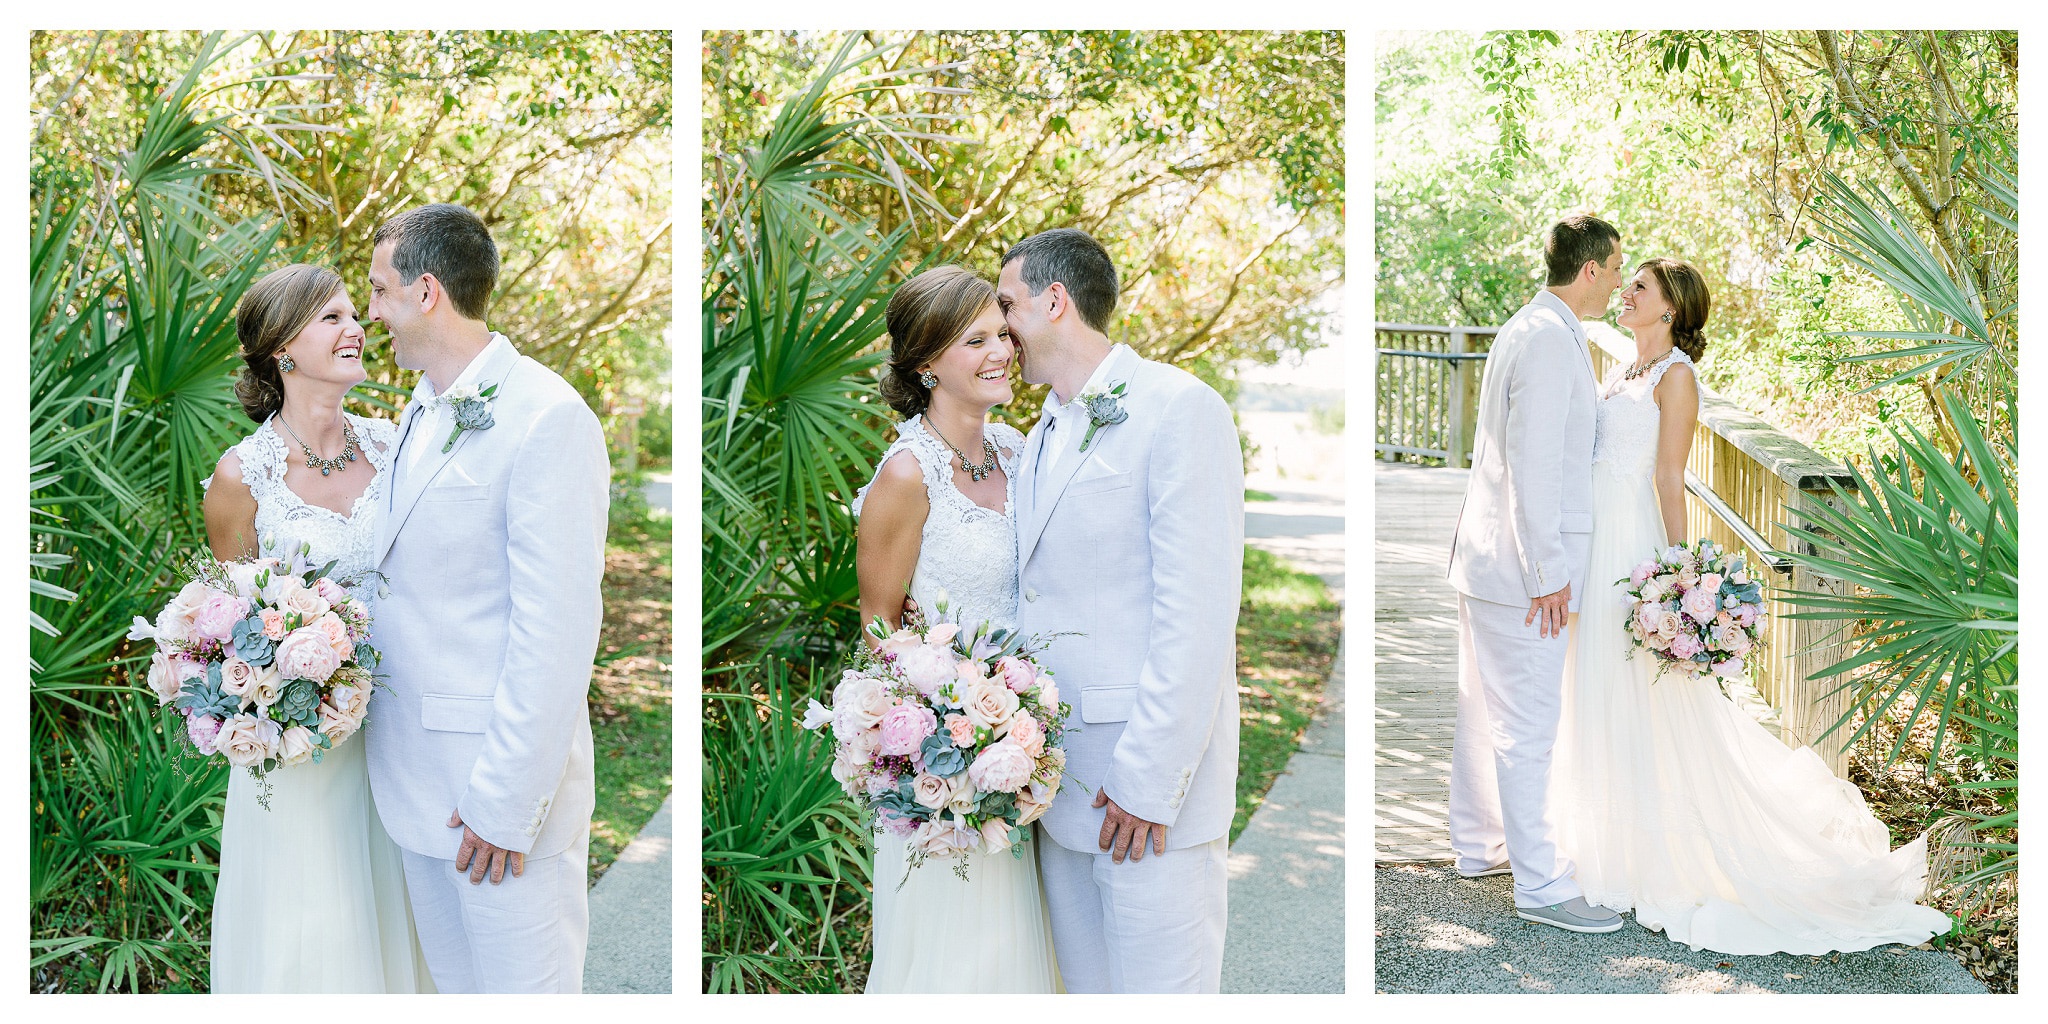 The Couple Looking at each other With Love in Their Eyes on a brick walkway through a garden - Myrtle Beach Wedding